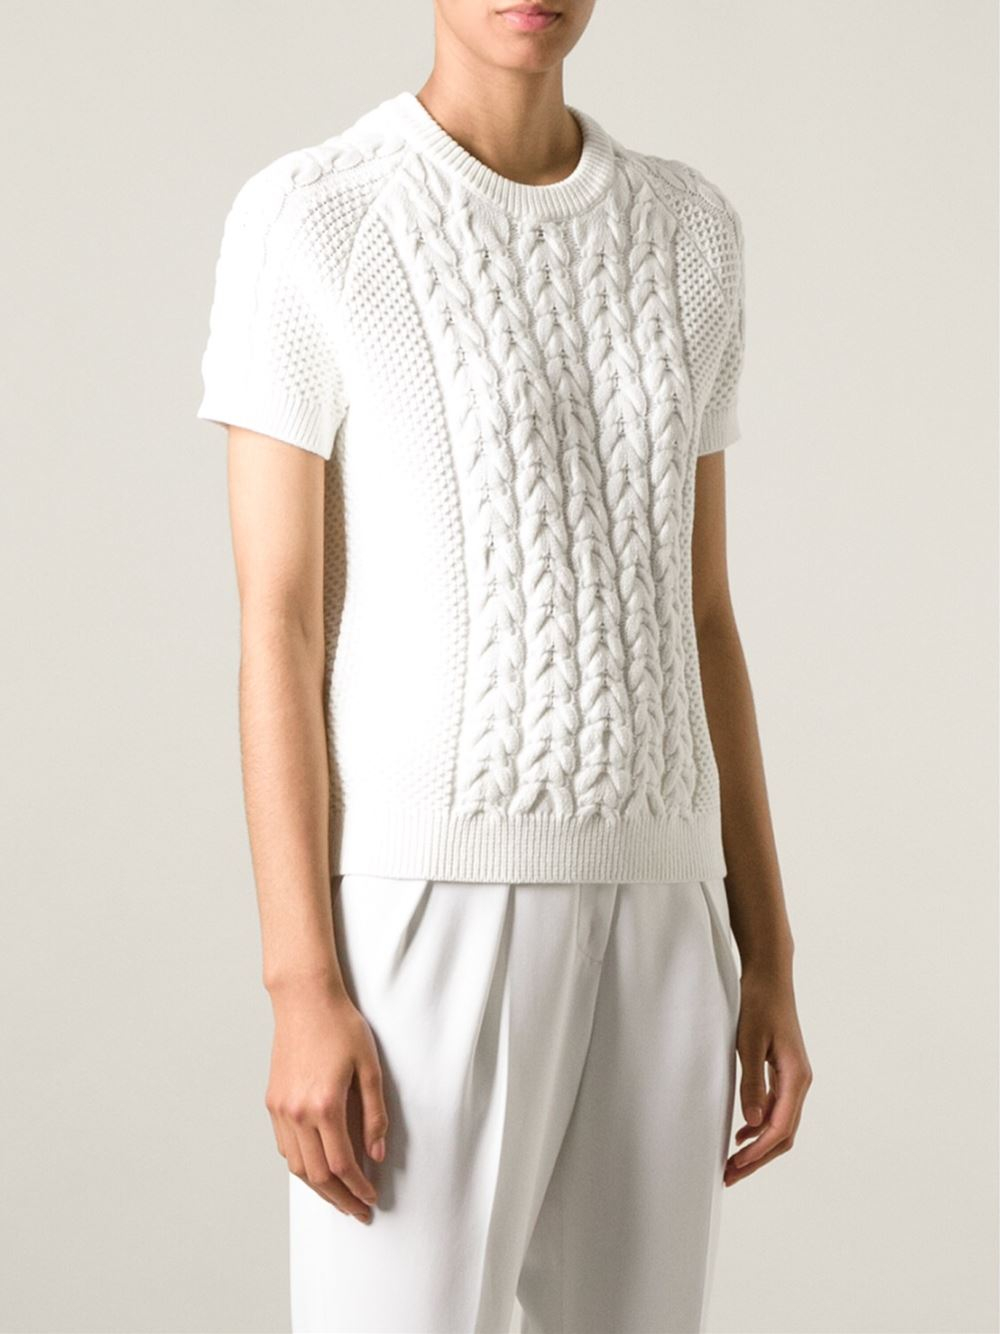 JOSEPH Short Sleeve Cable Knit Sweater in White - Lyst